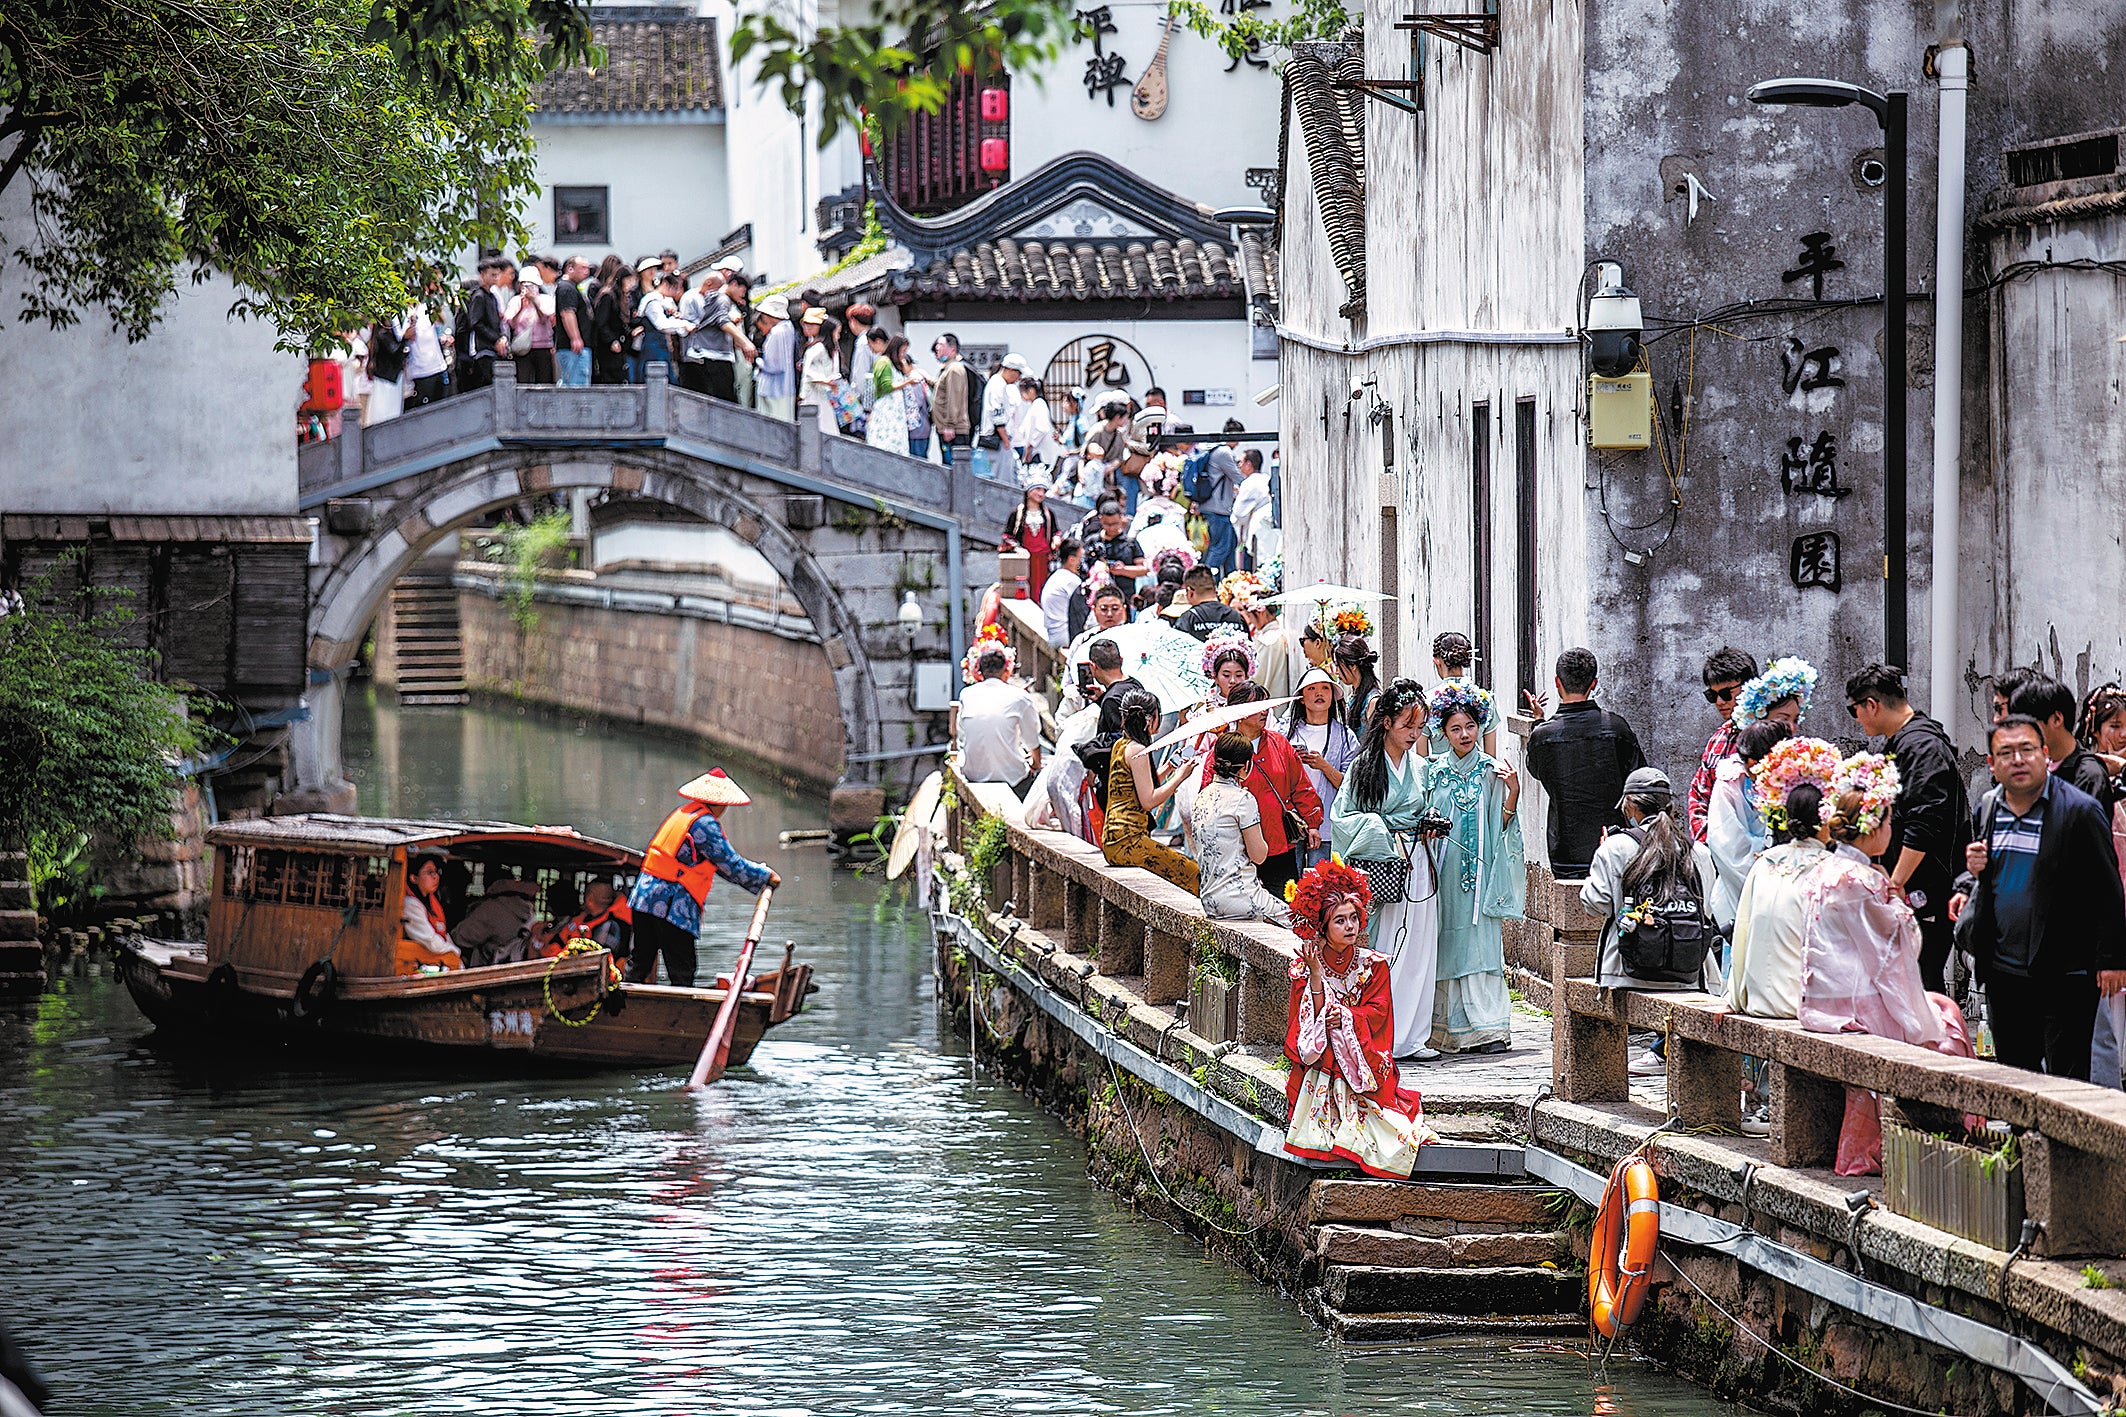 Tourists flock to the Pingjiang block neighbourhood in Suzhou during the May Day holiday